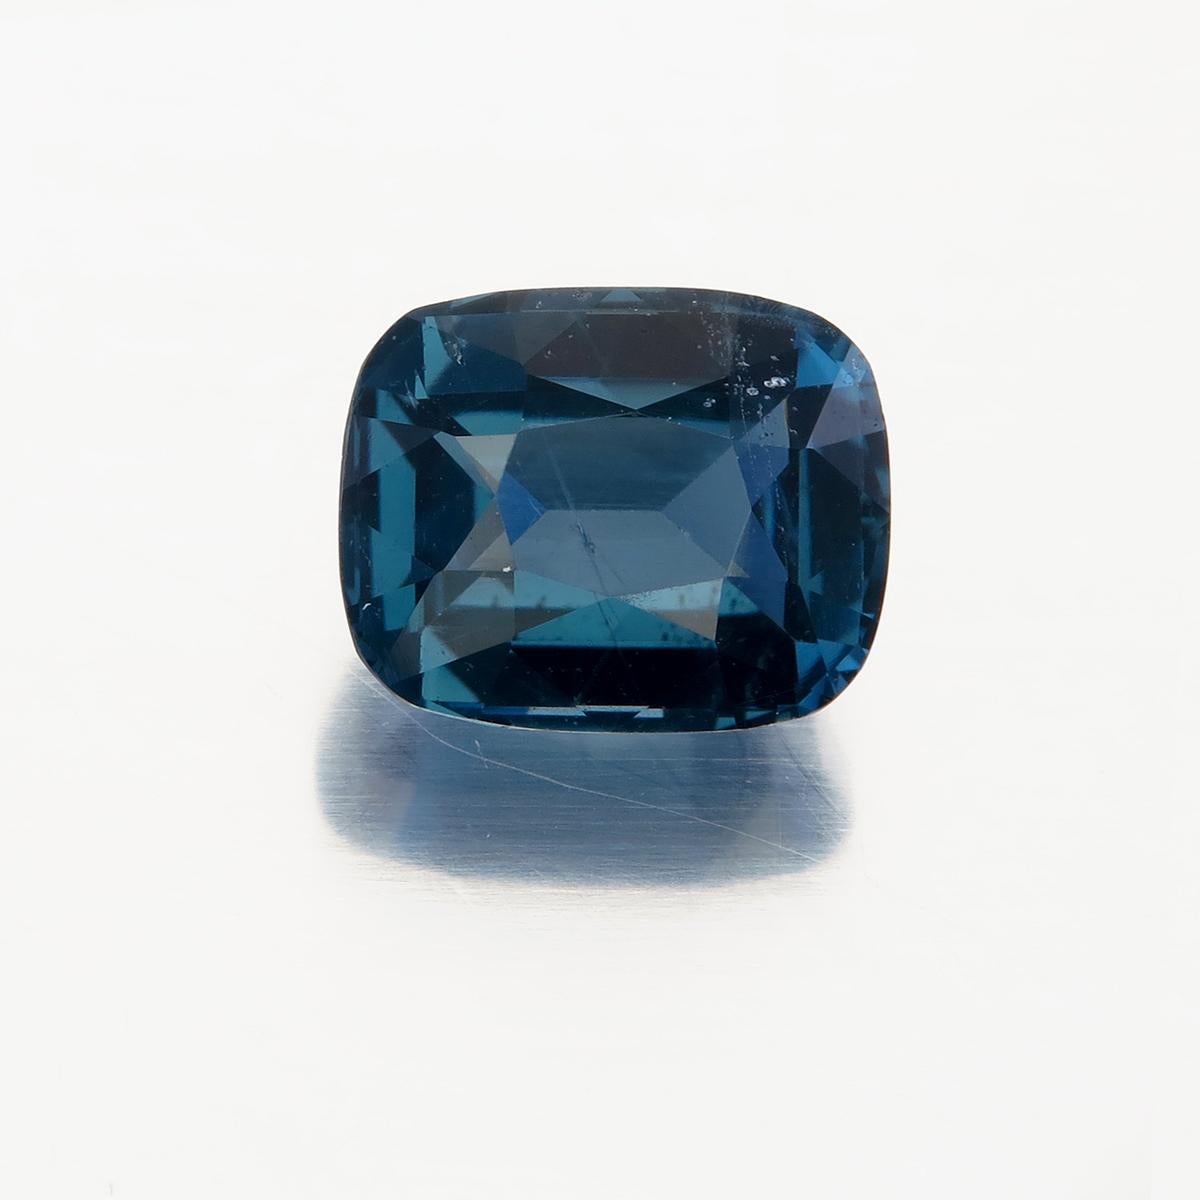 1.92 Carat Blue Spinel from Sri Lanka
Shape: Antique. Cushion
Cutting Style: Faceted Brilliant Modified Step
Dimensions: 8.20 x 6.62 x 4.13 mm
Color: Blue with medium saturation and medium tone
Weight: 1.92 Carat
No Heat or treatment
Lotus report: